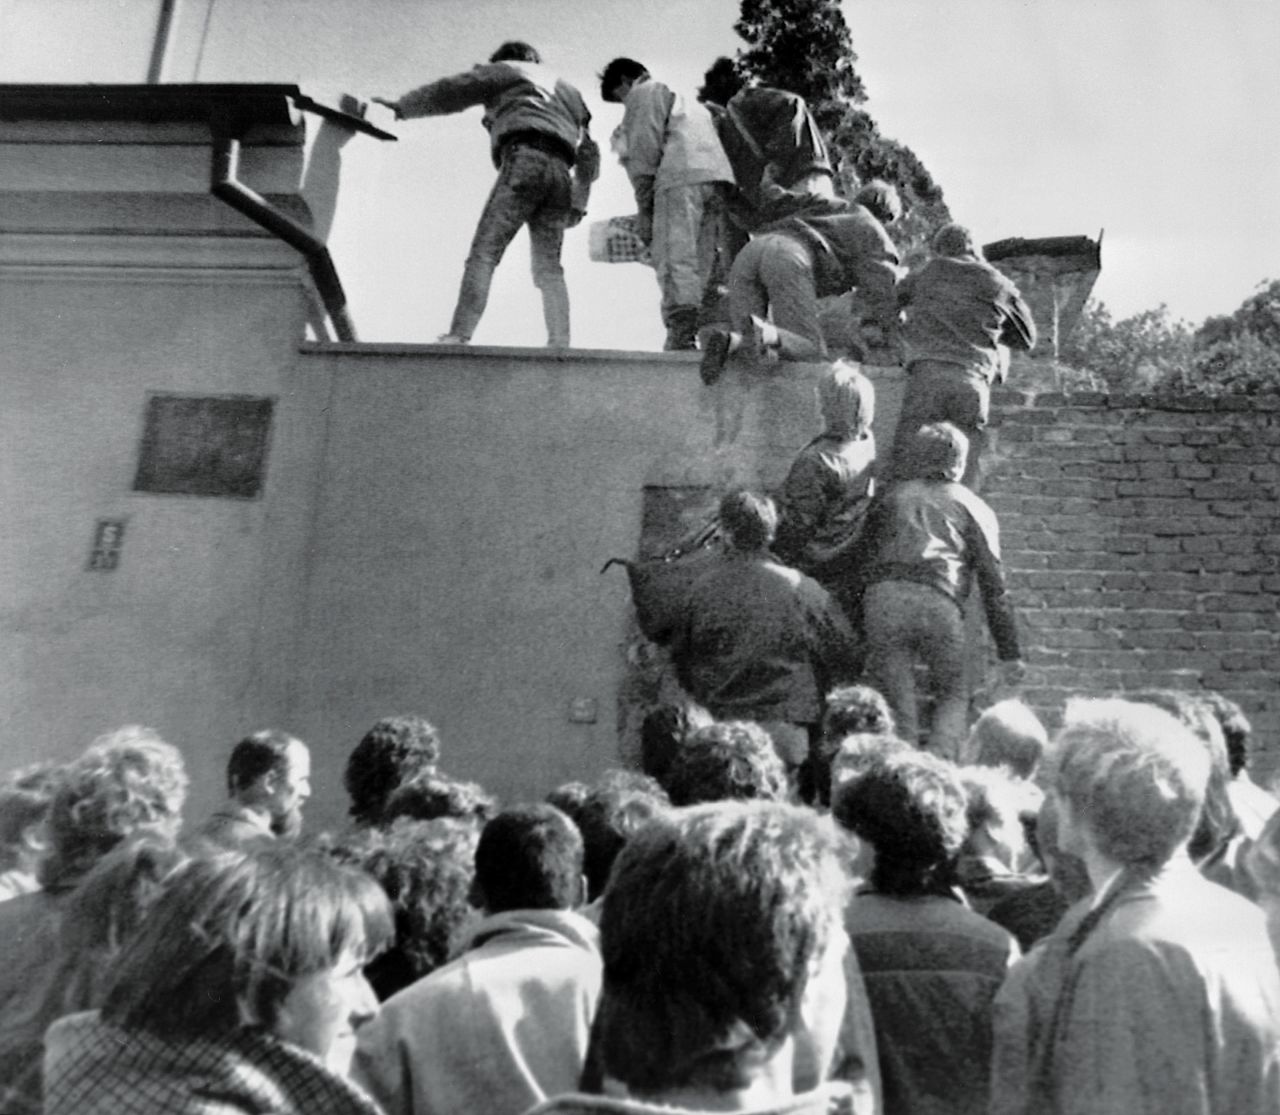 East German citizens scale the walls of the West German embassy in Prague in October 1989, in a desperate first step to freedom.